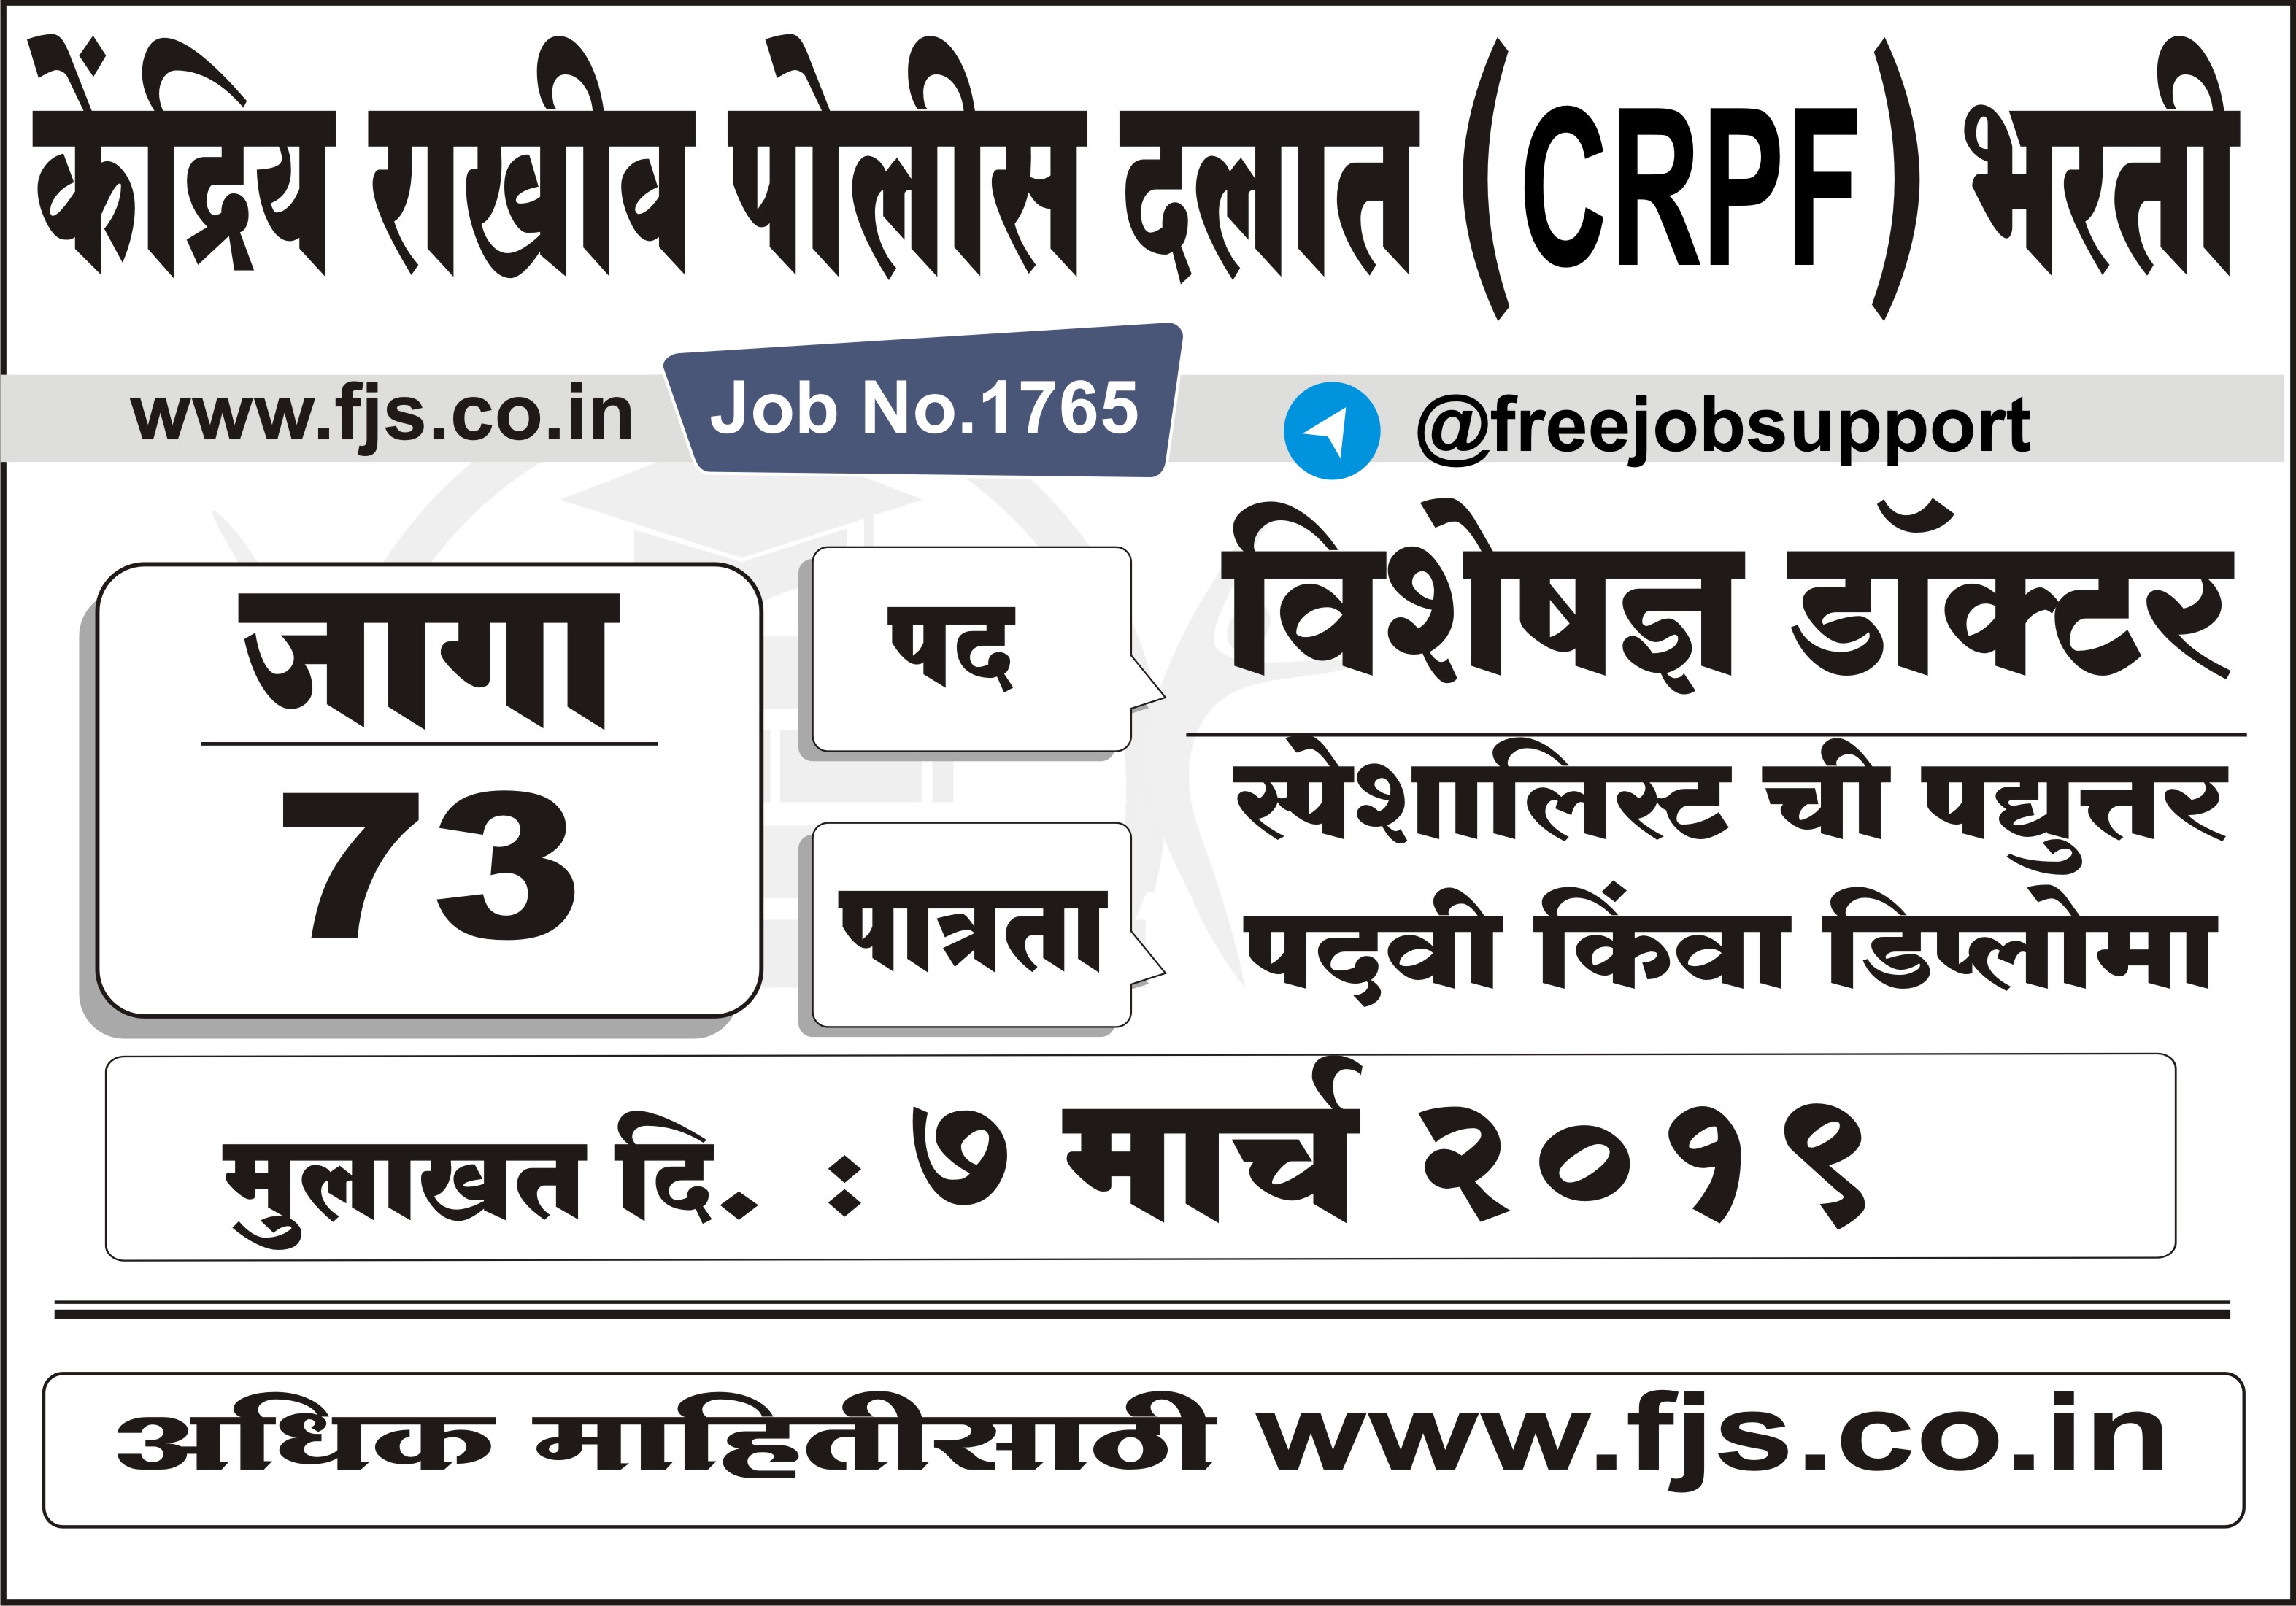 Specialists Doctor, Central Reserve Police Force Recruitment for 73 post, crpf Recruitment 2019